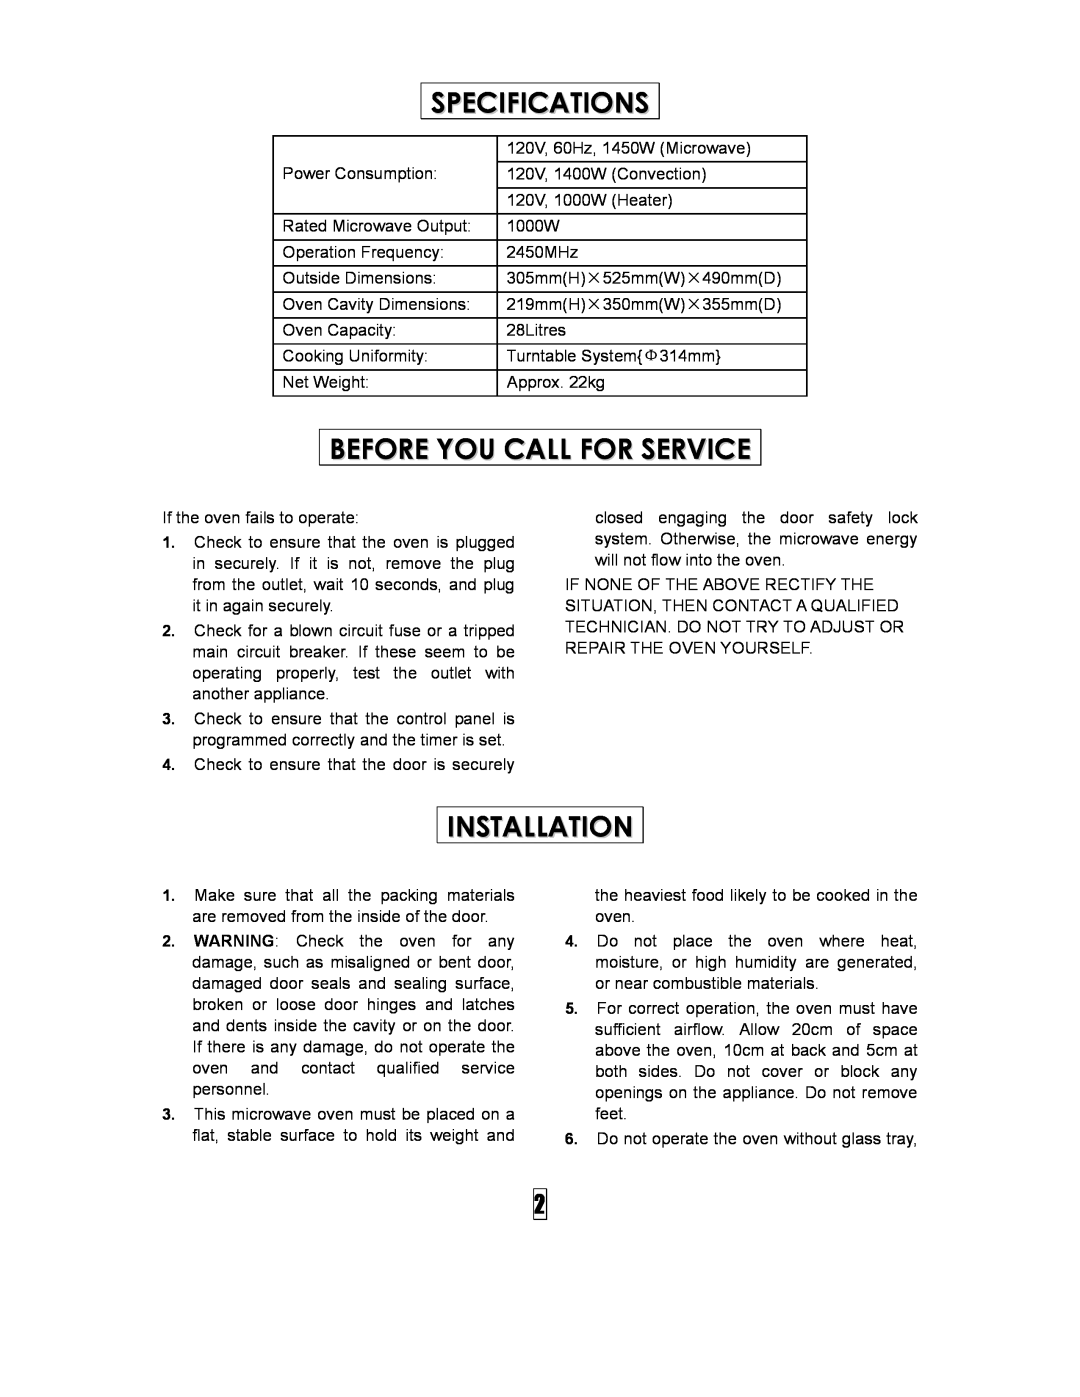 Curtis SMW5500 owner manual Specifications, Before You Call For Service, Installation 